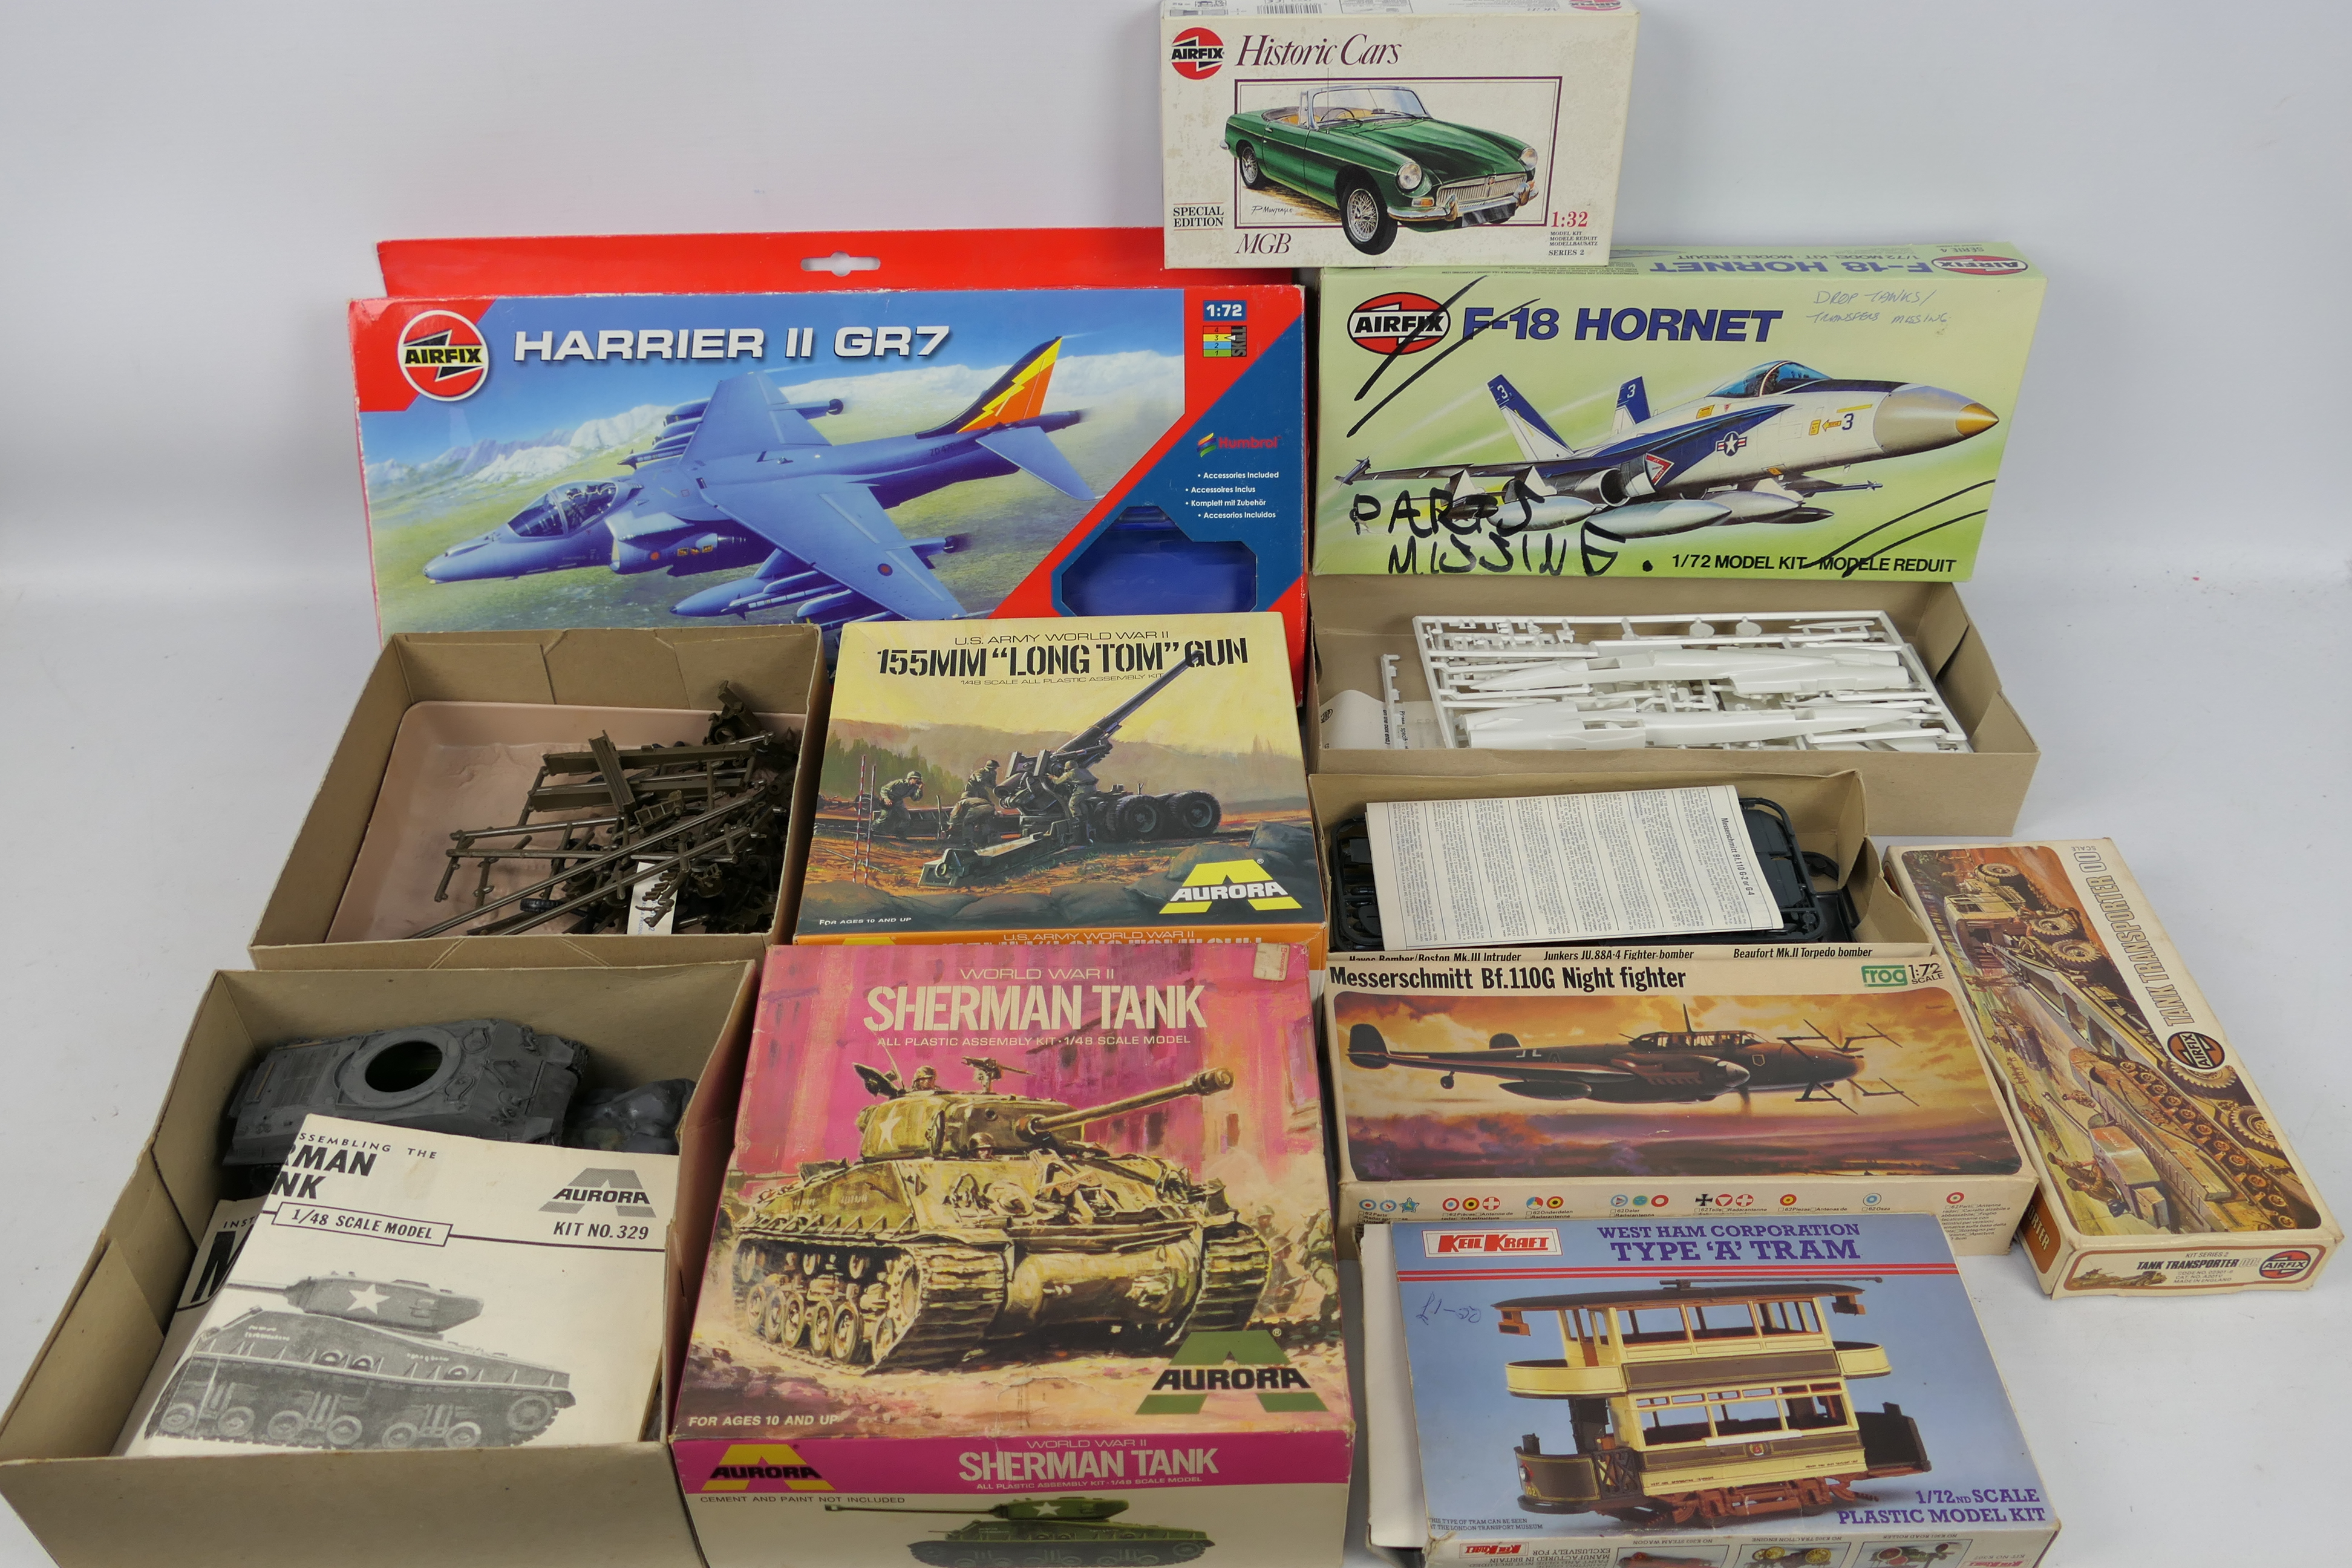 Airfix - Aurora - Frog - Others - A group of part-built / incomplete boxed plastic models kits in